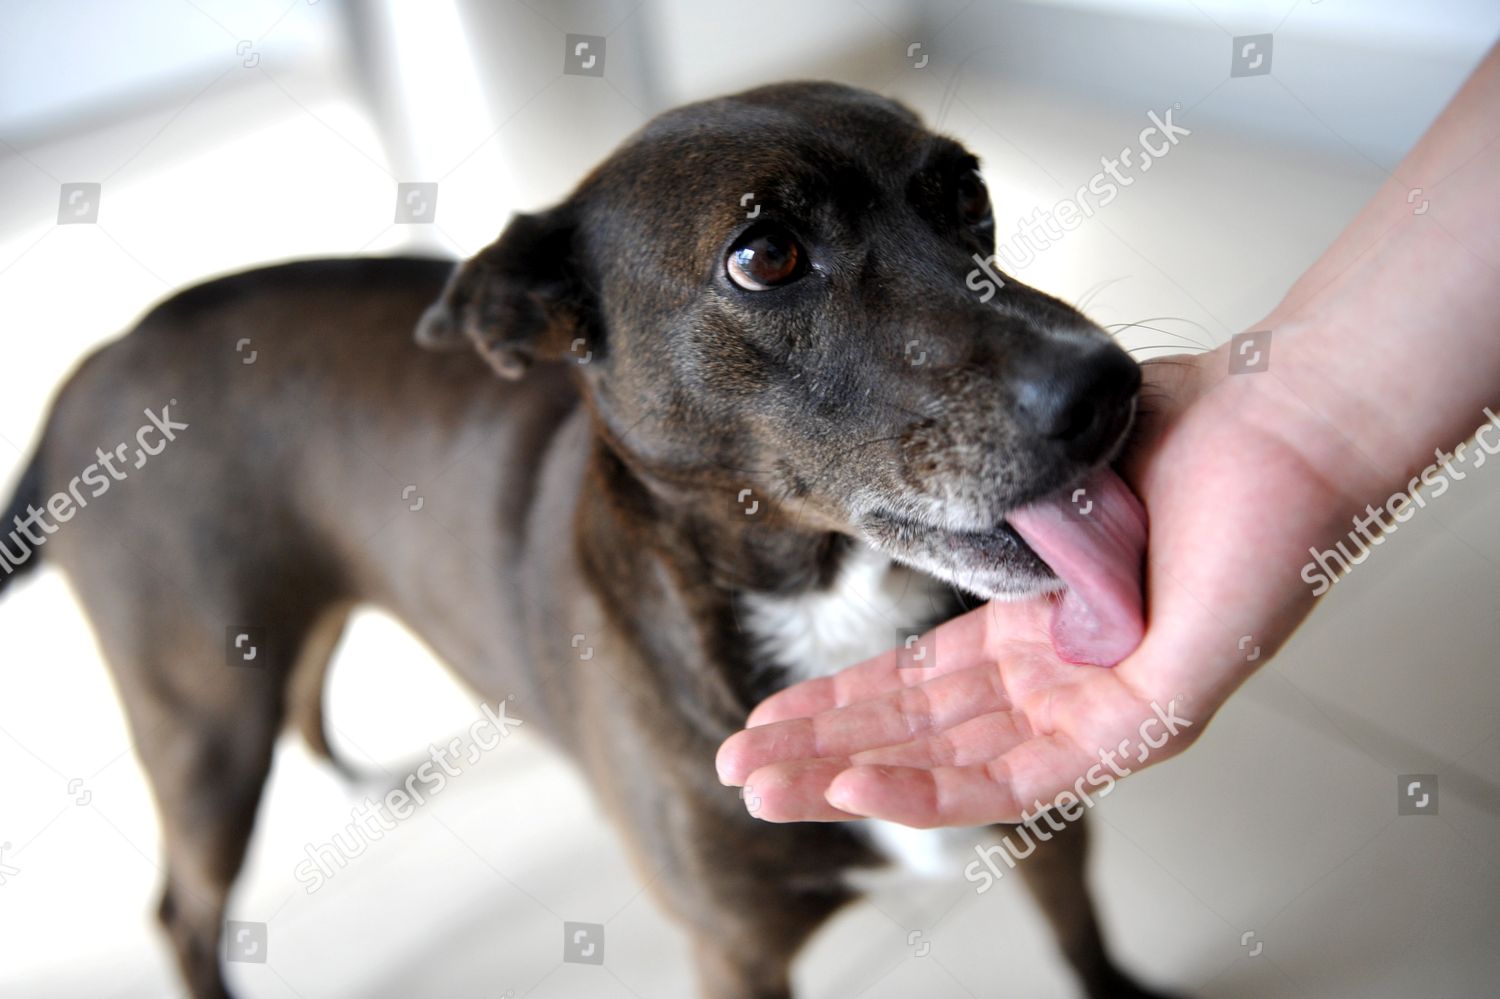 why do dogs like licking hands